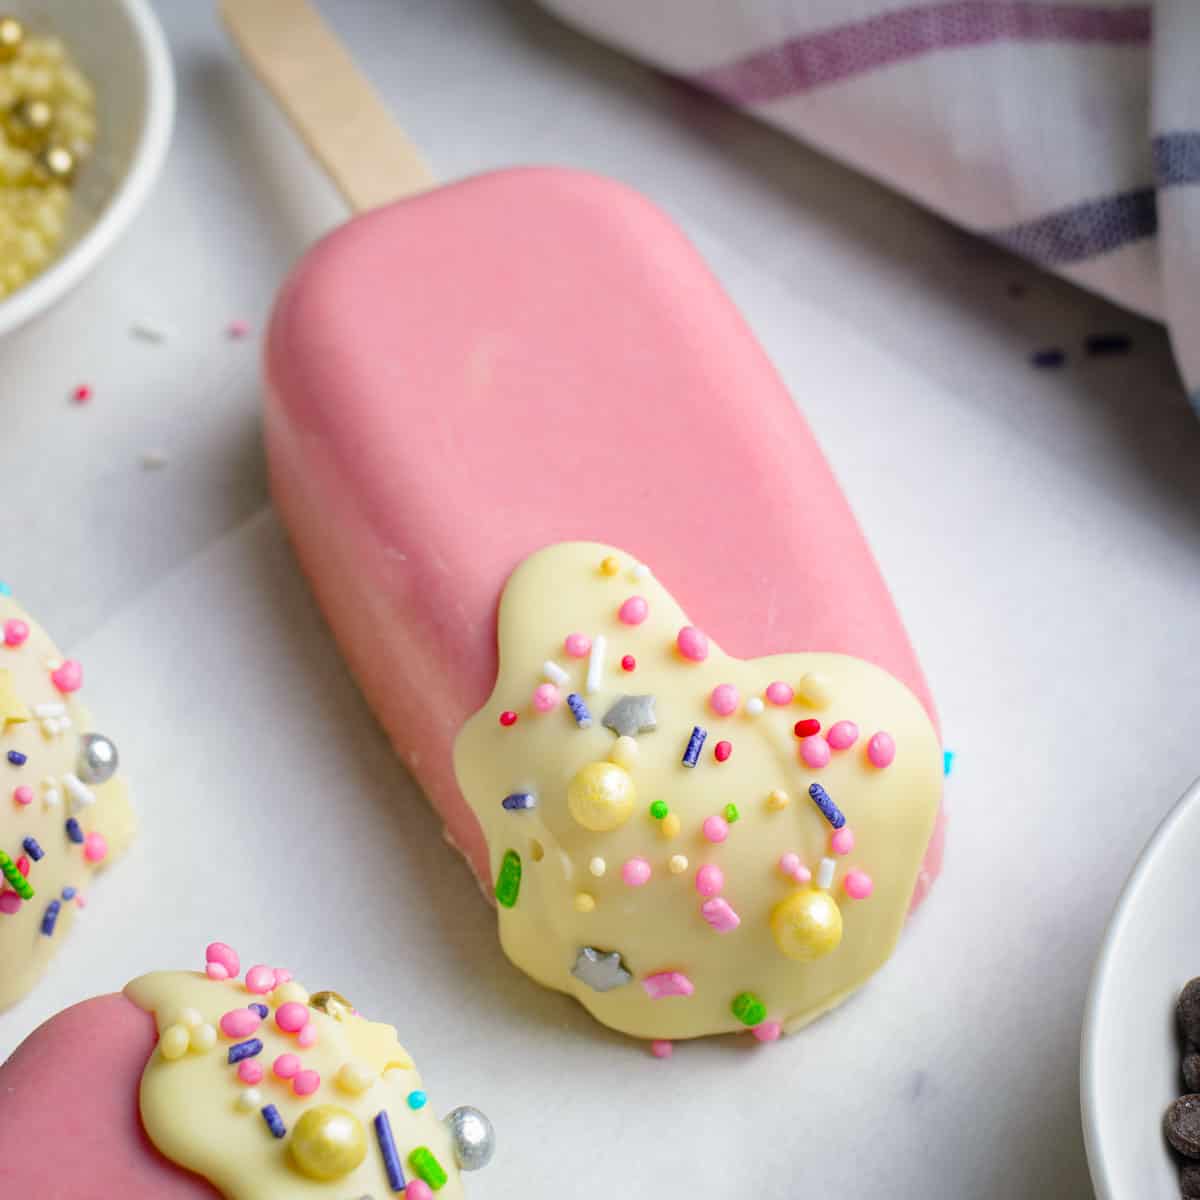 Close up shot of a brownie cakesicle garnished with sprinkles on a white surface with more sprinkles in the background.